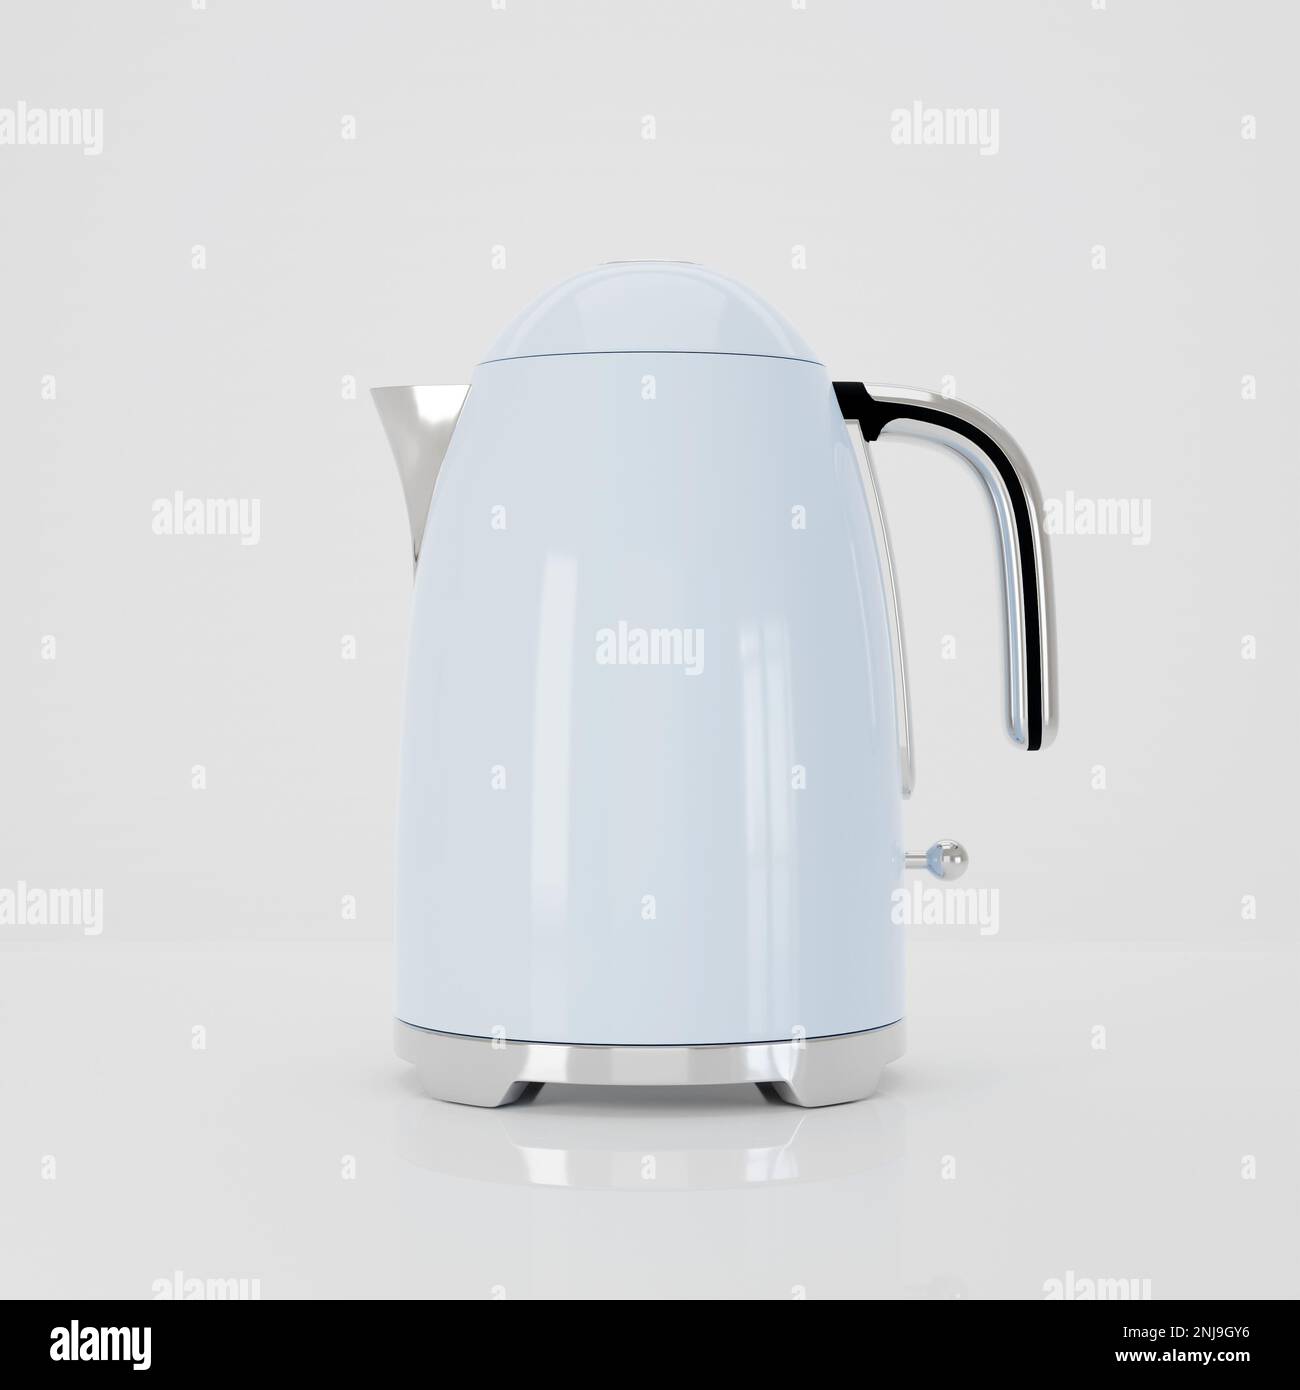 https://c8.alamy.com/comp/2NJ9GY6/3d-rendering-light-blue-vintage-electric-kettle-stainless-steel-base-and-handle-2NJ9GY6.jpg